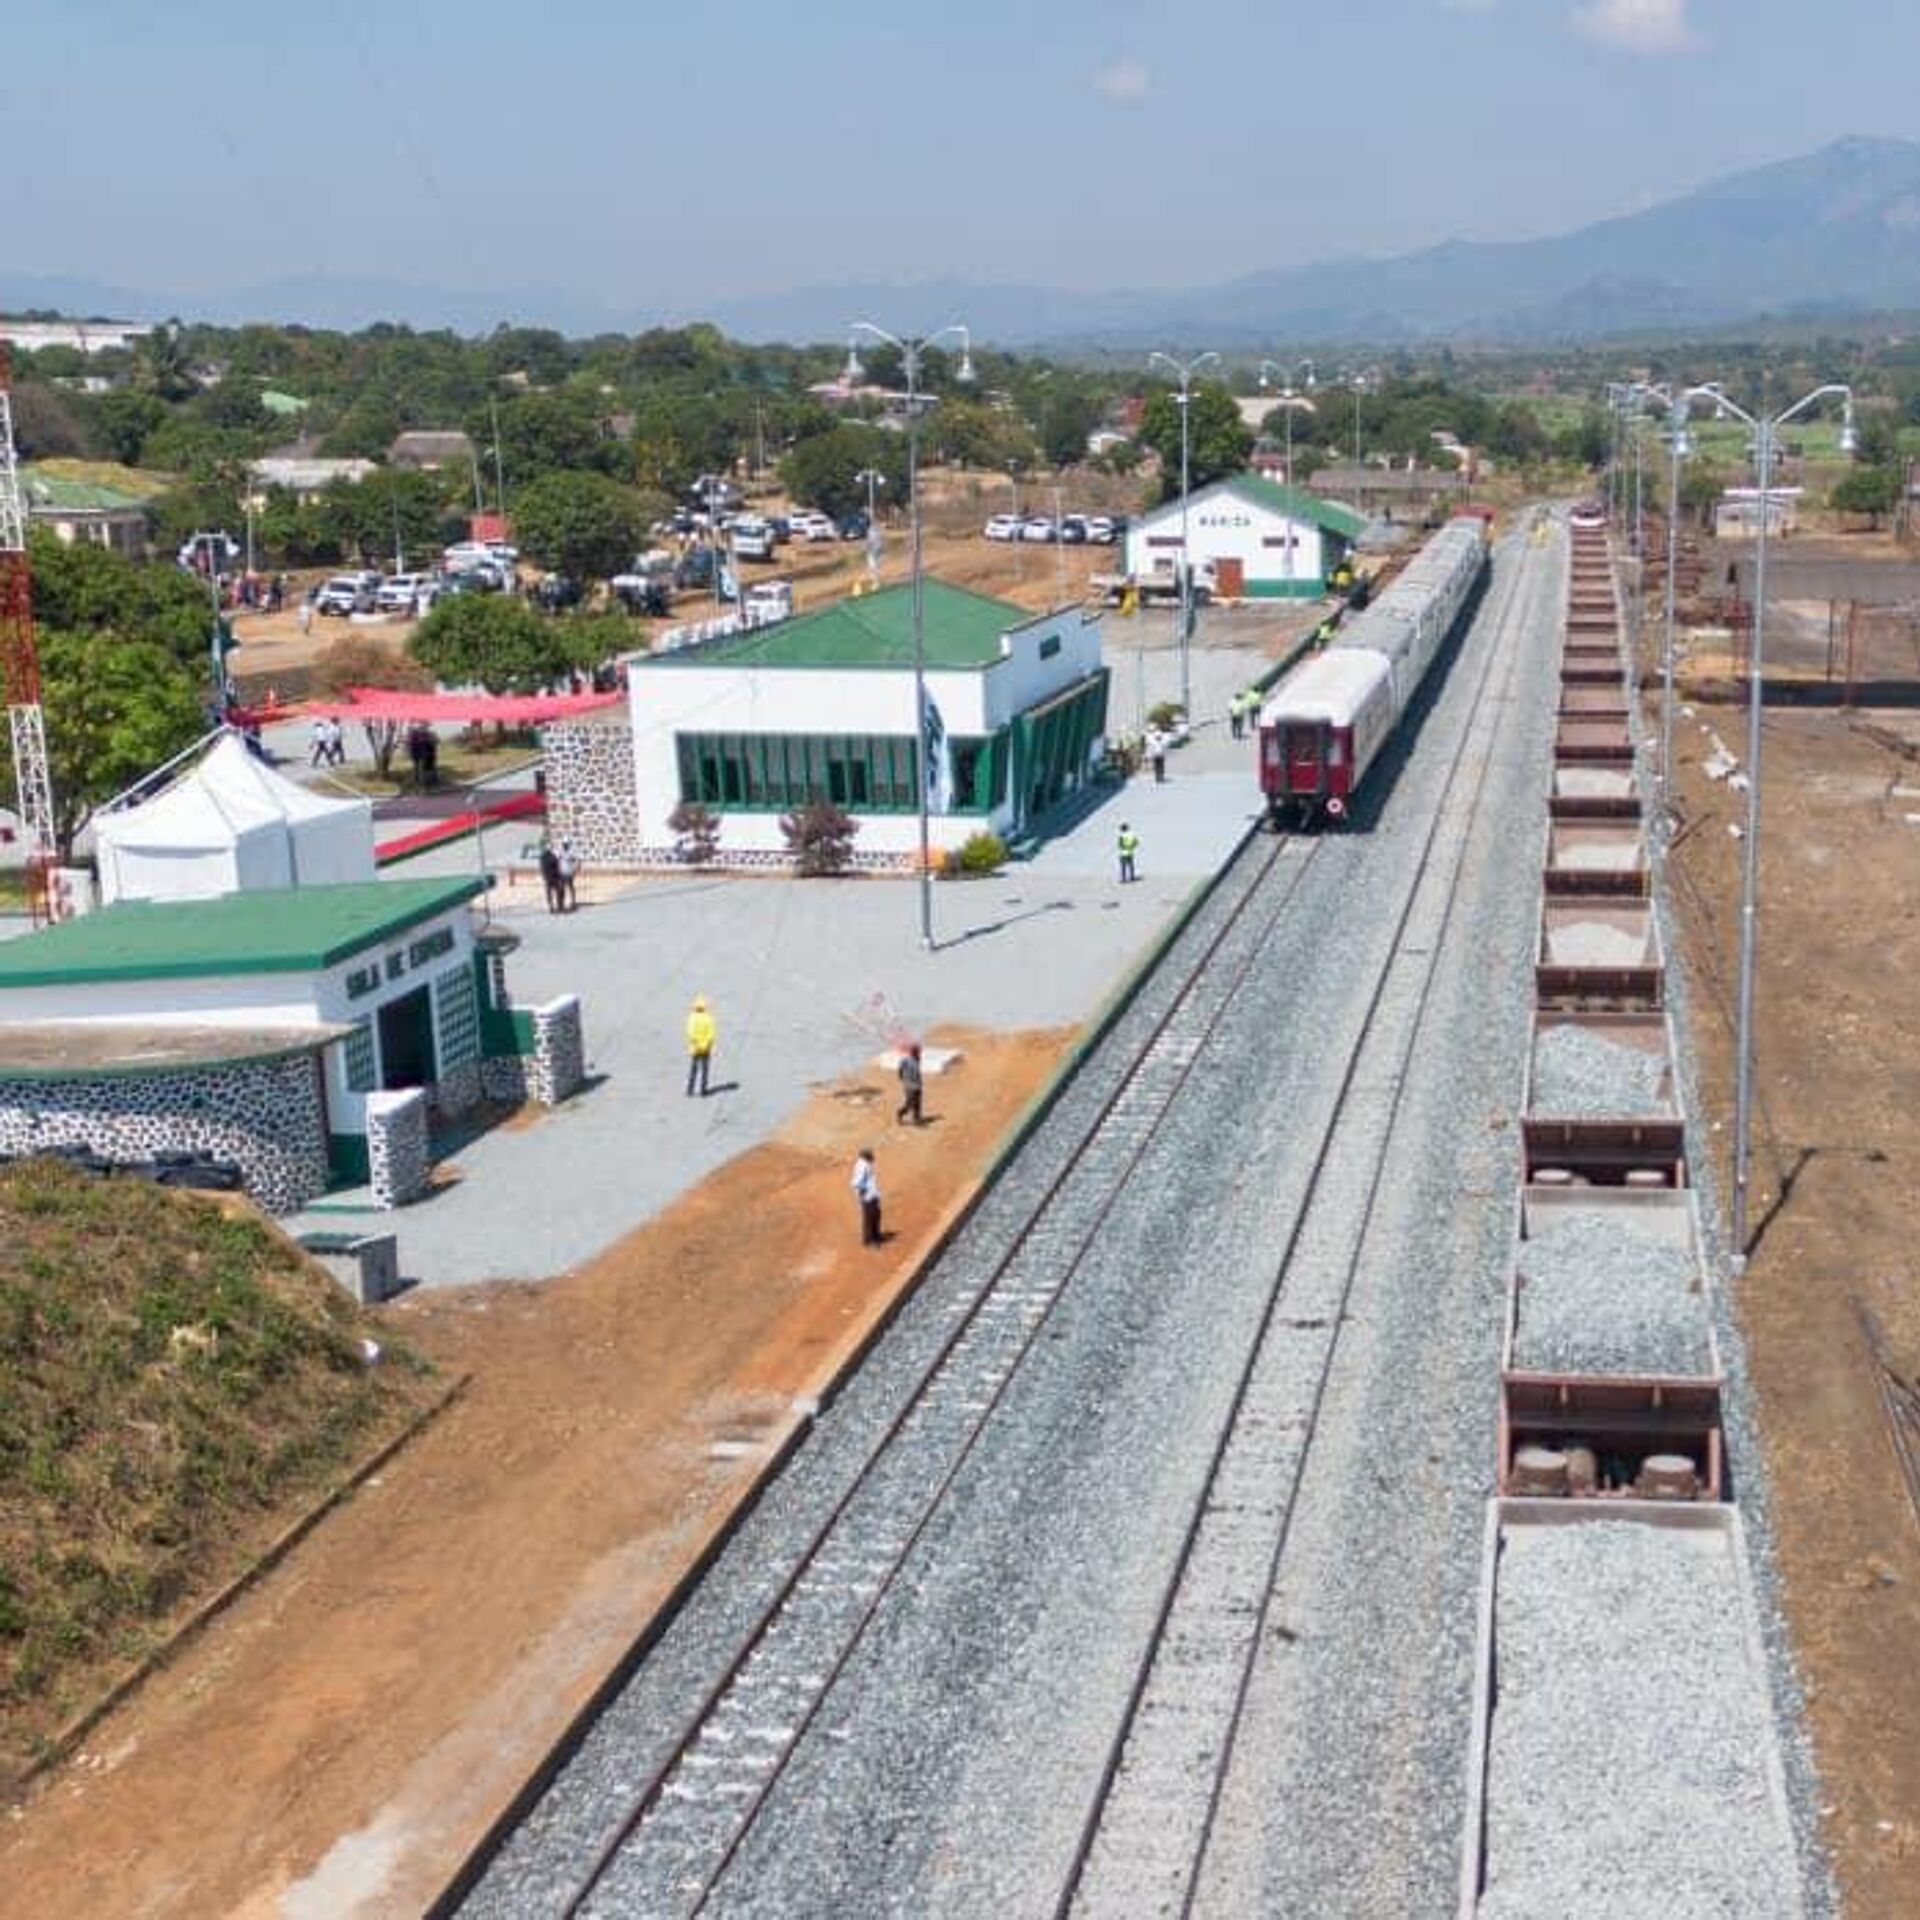 Mozambique And Zimbabwe Agree To Refurbish And Extend Railway Line